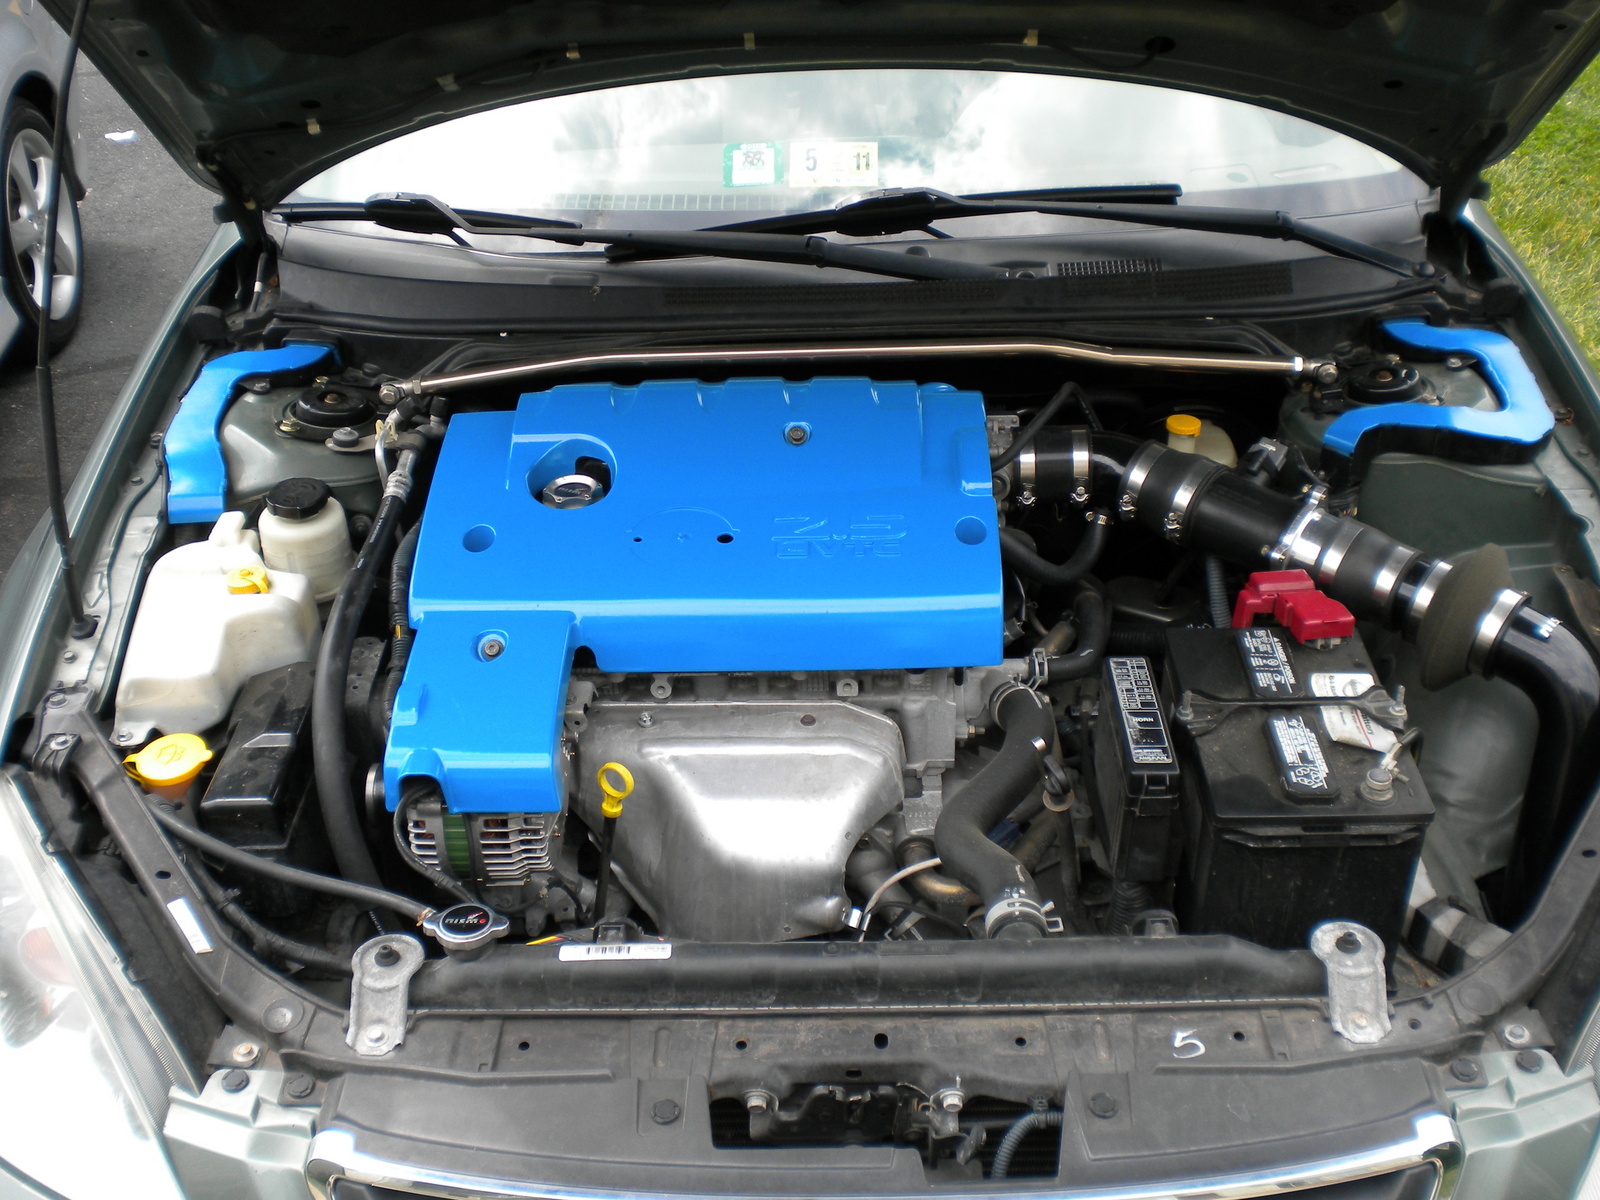 Engine for a 2002 nissan altima #4